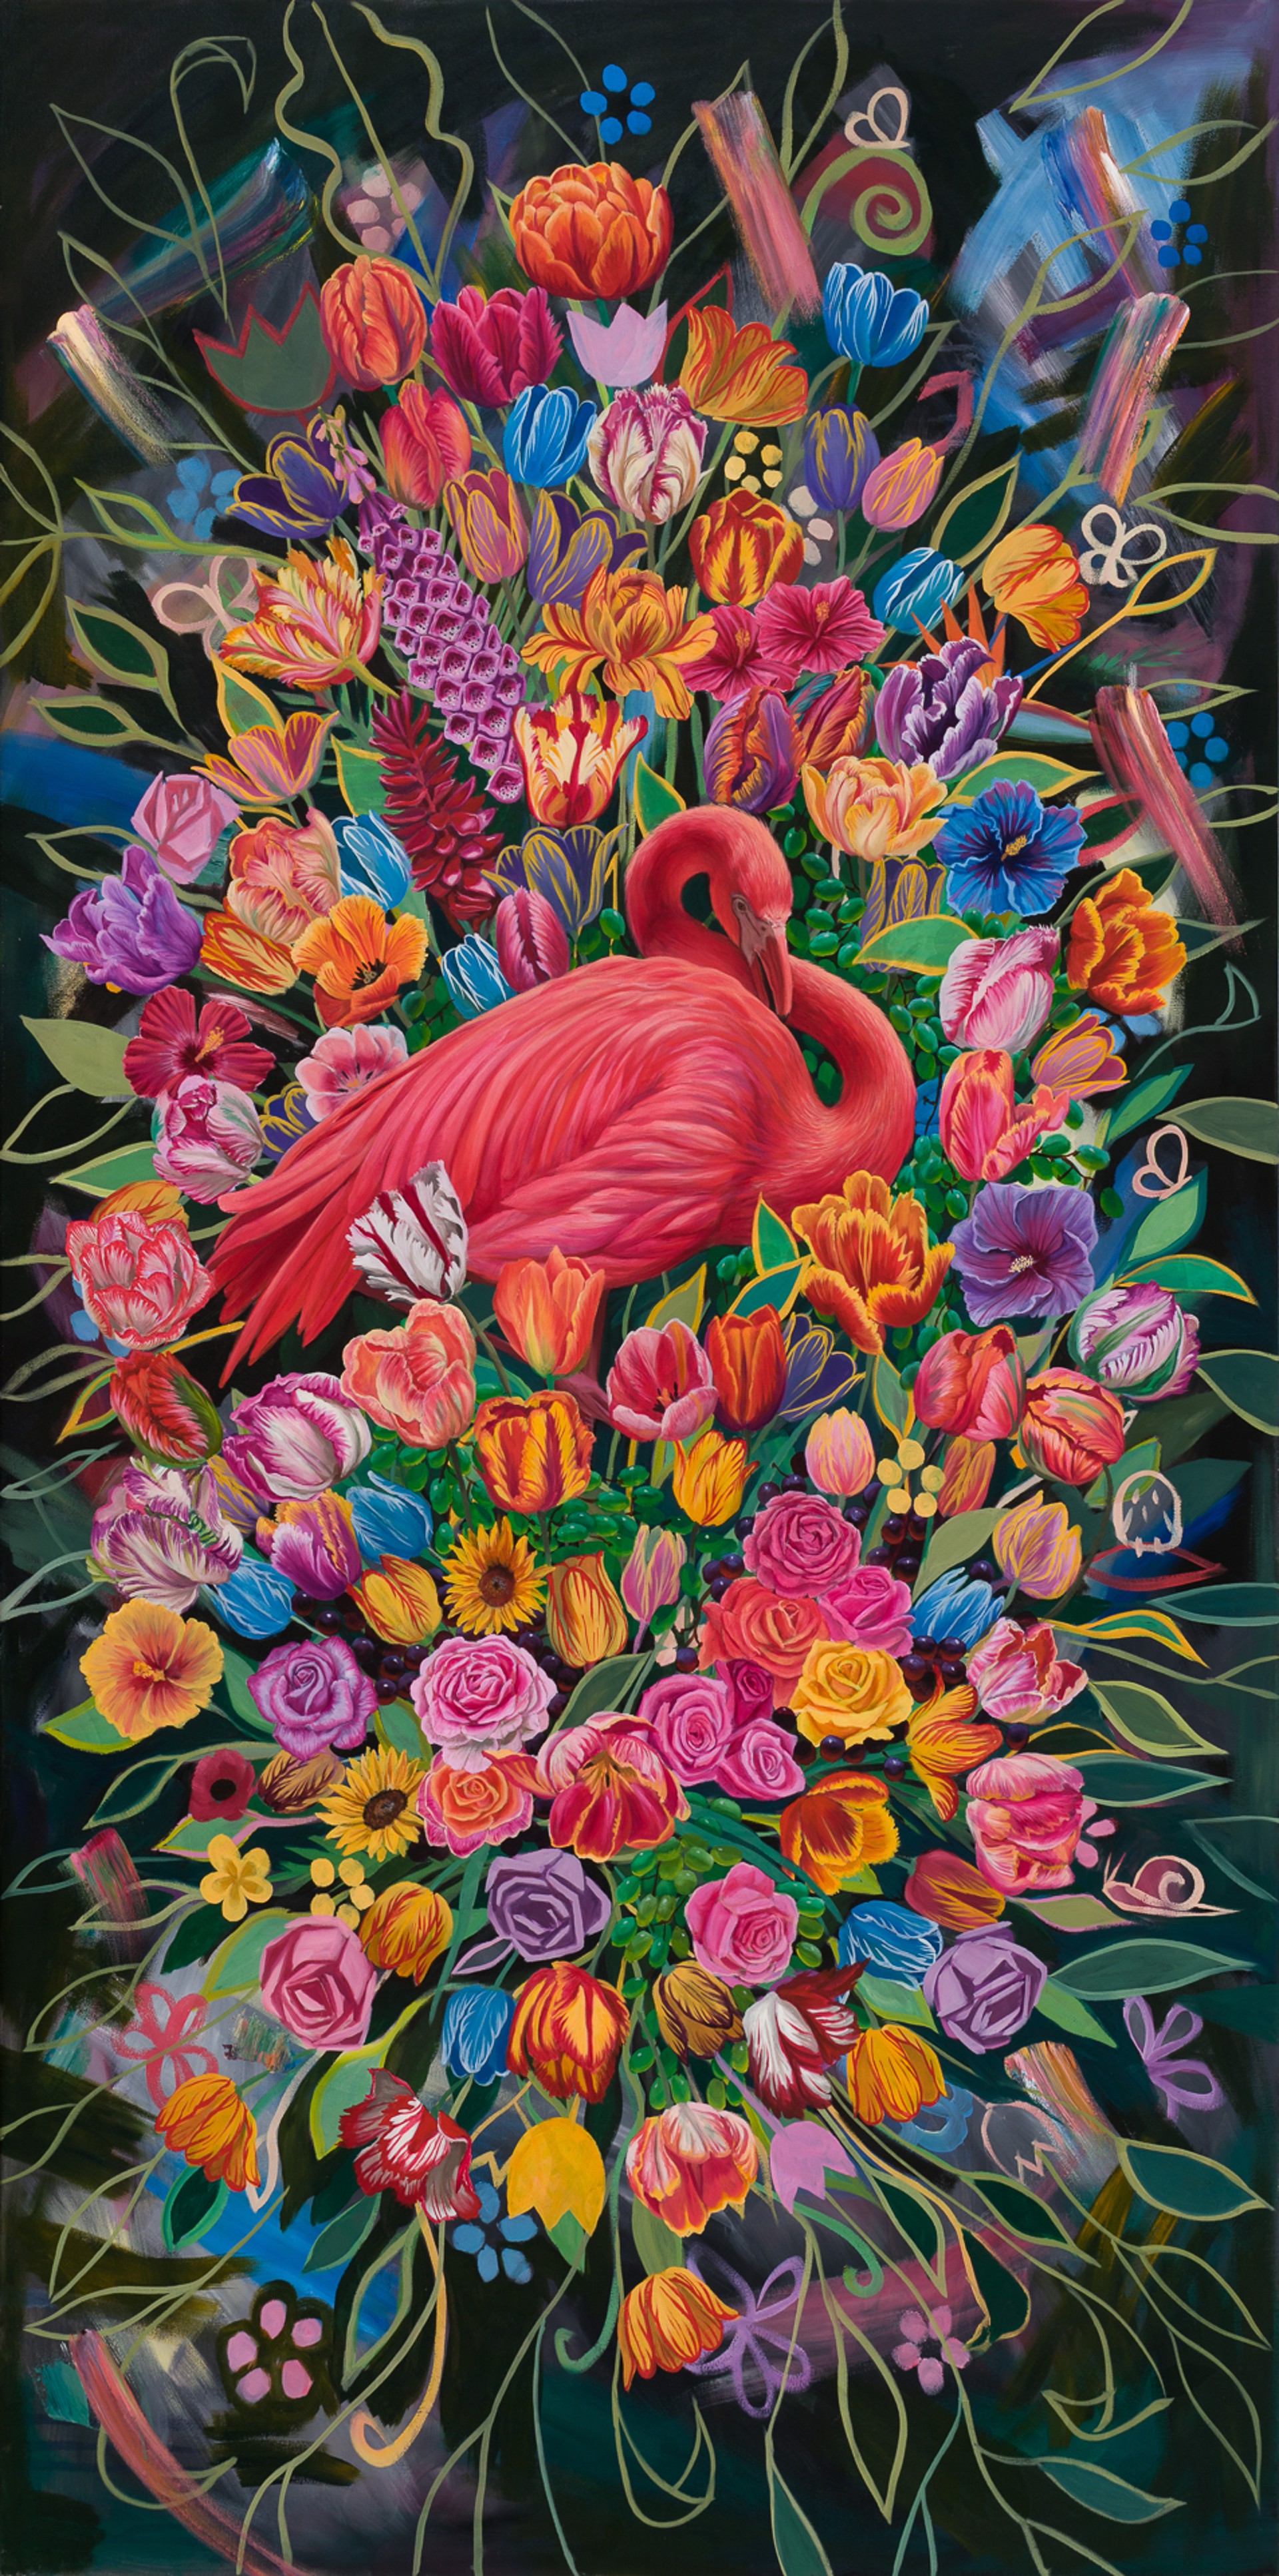 A Flamingo Resting in Parrot Tulips by Robin Hextrum